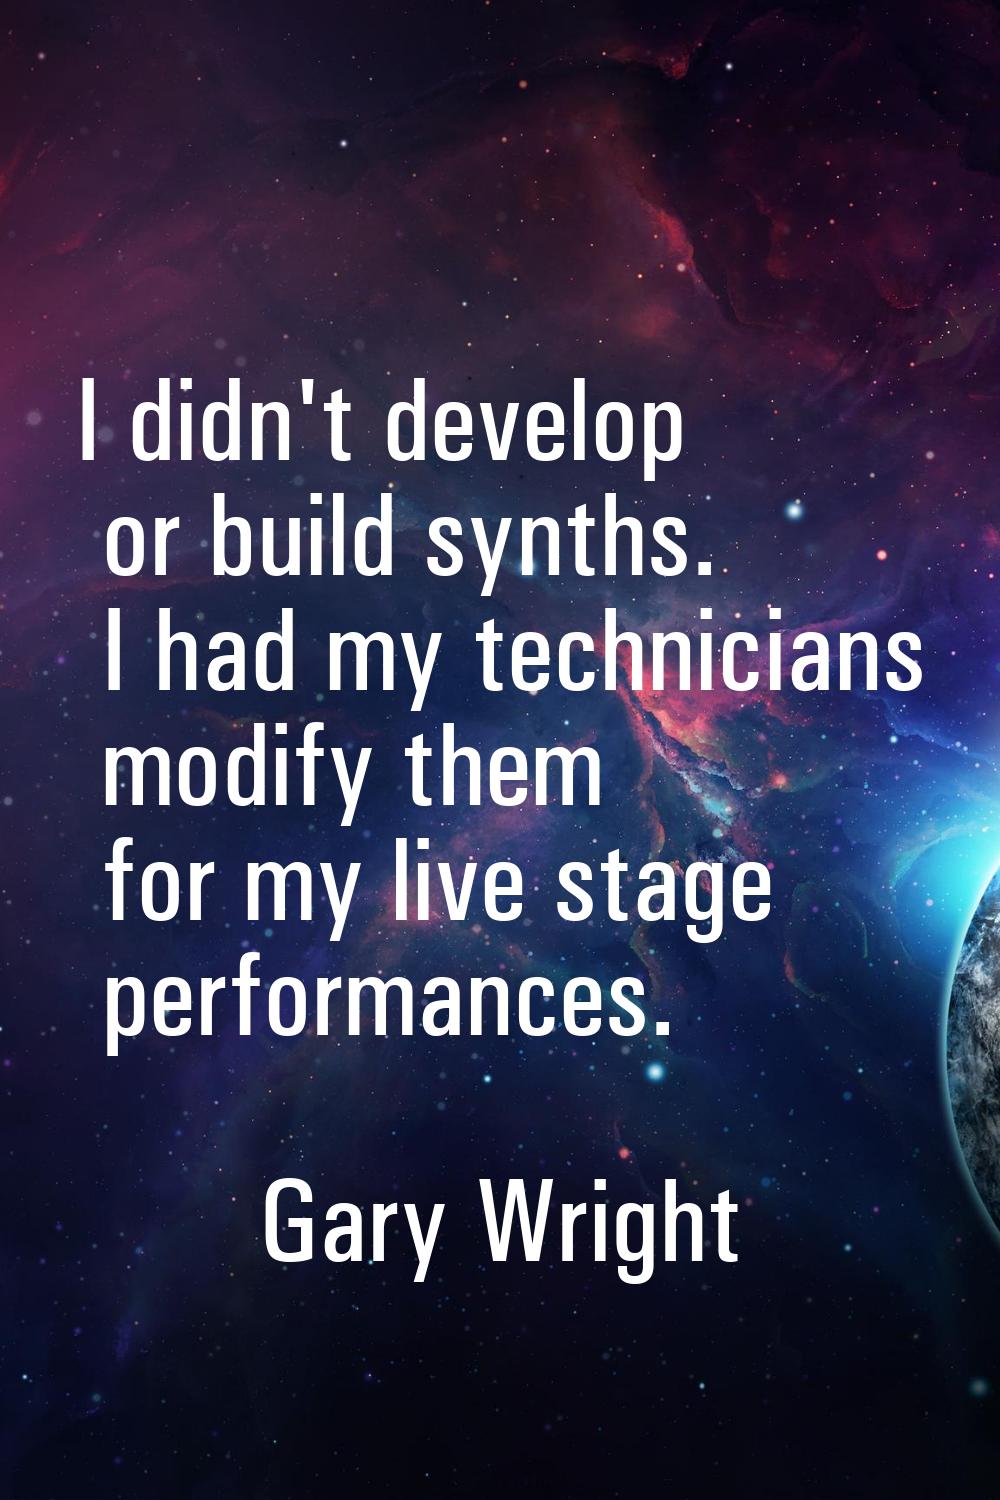 I didn't develop or build synths. I had my technicians modify them for my live stage performances.